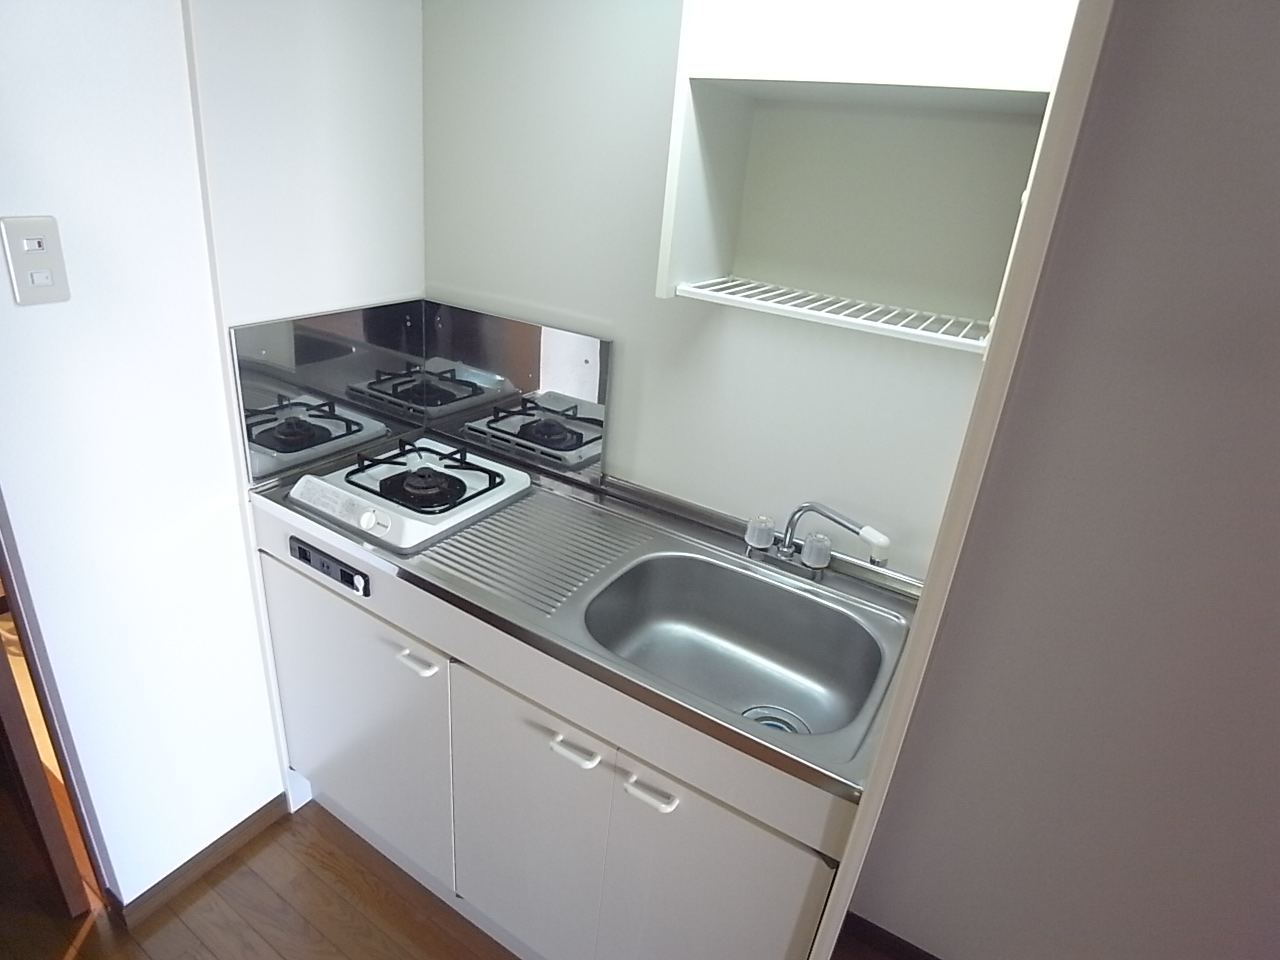 Kitchen. Immediately usable with a gas stove! 